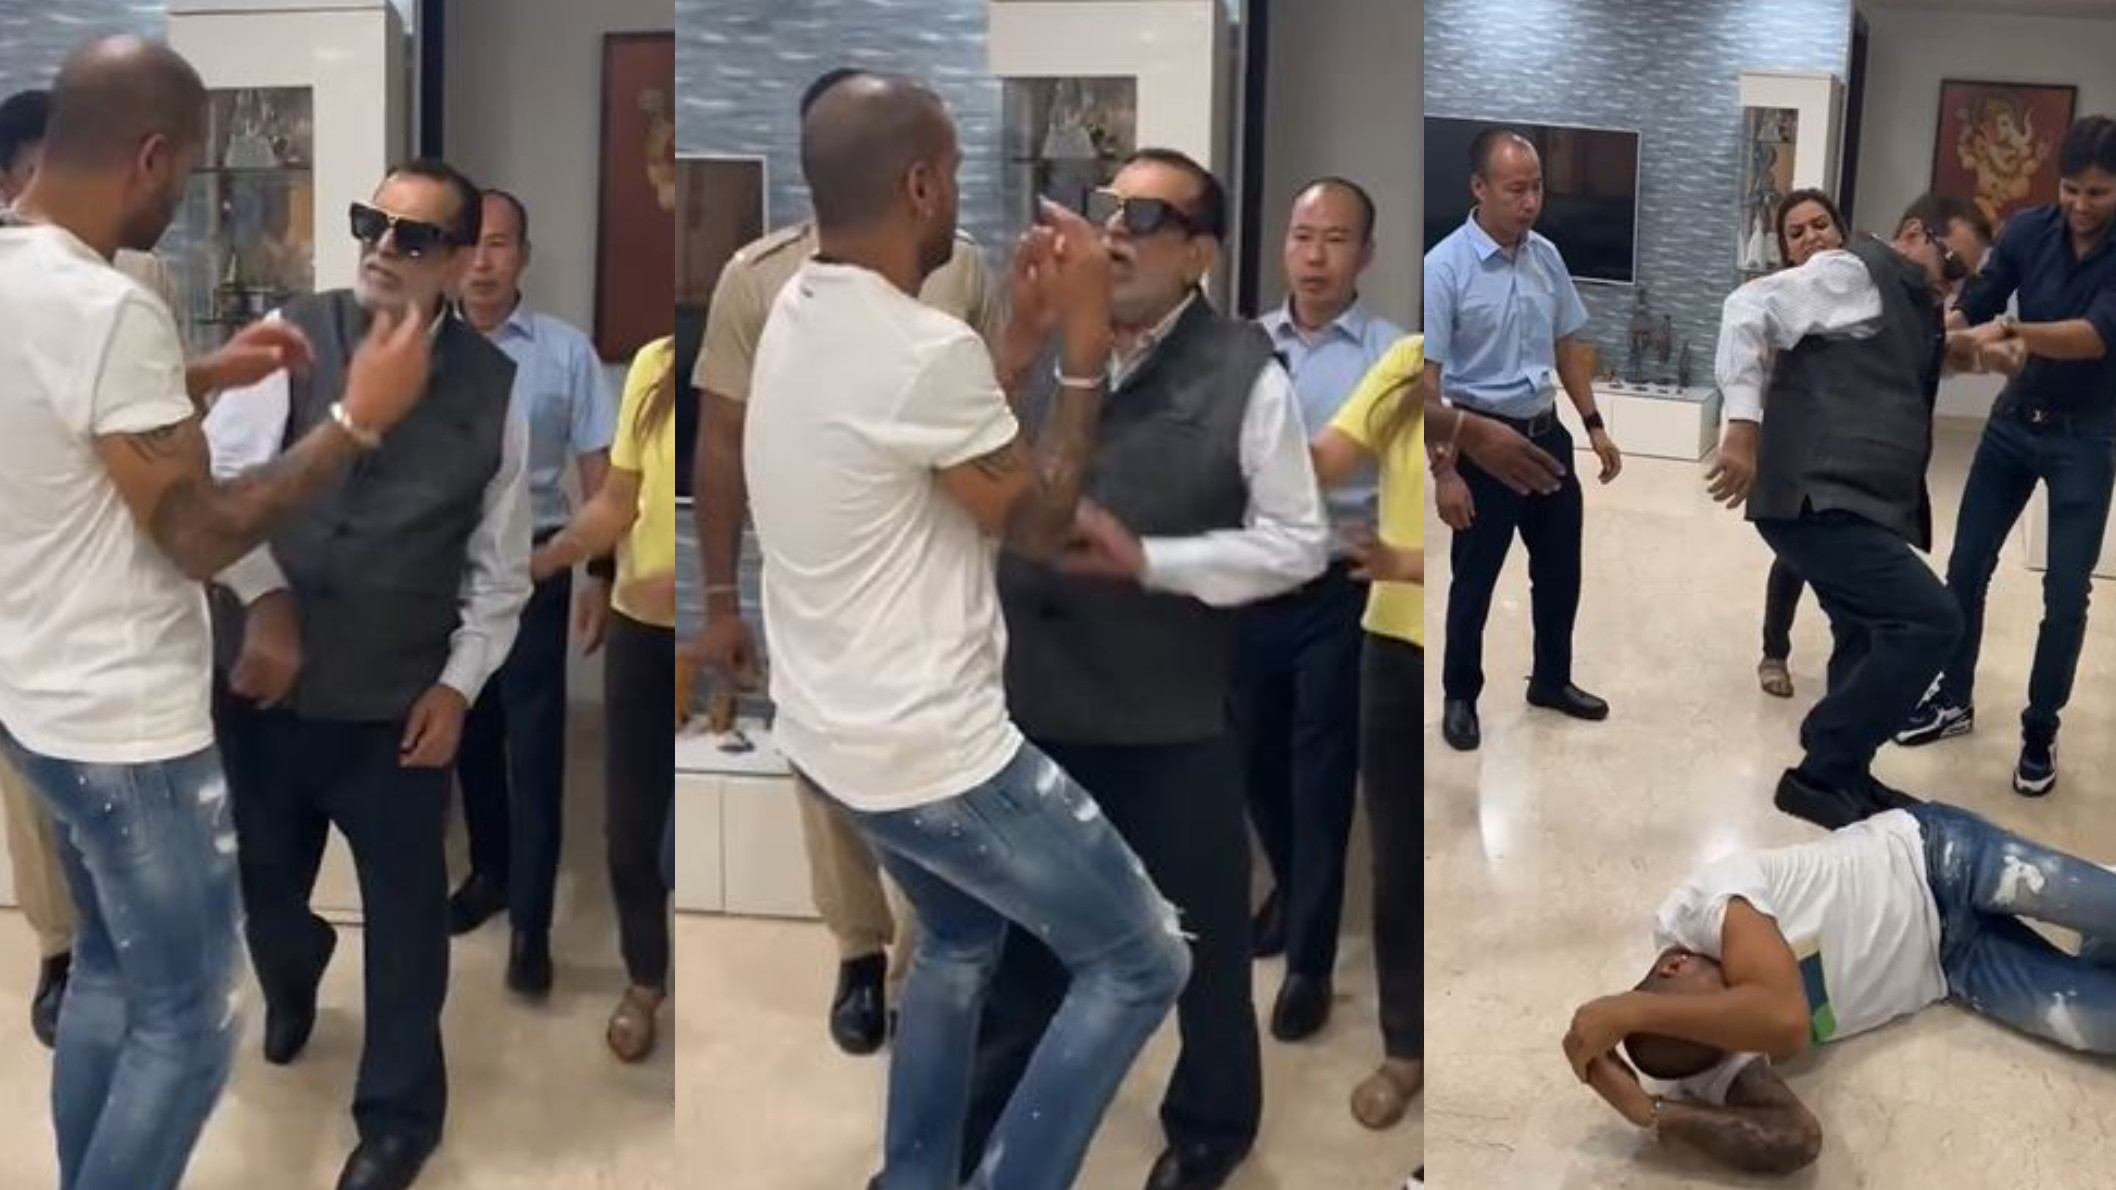 WATCH- Shikhar Dhawan’s father beats him for not qualifying for IPL 2022 playoffs in a funny video